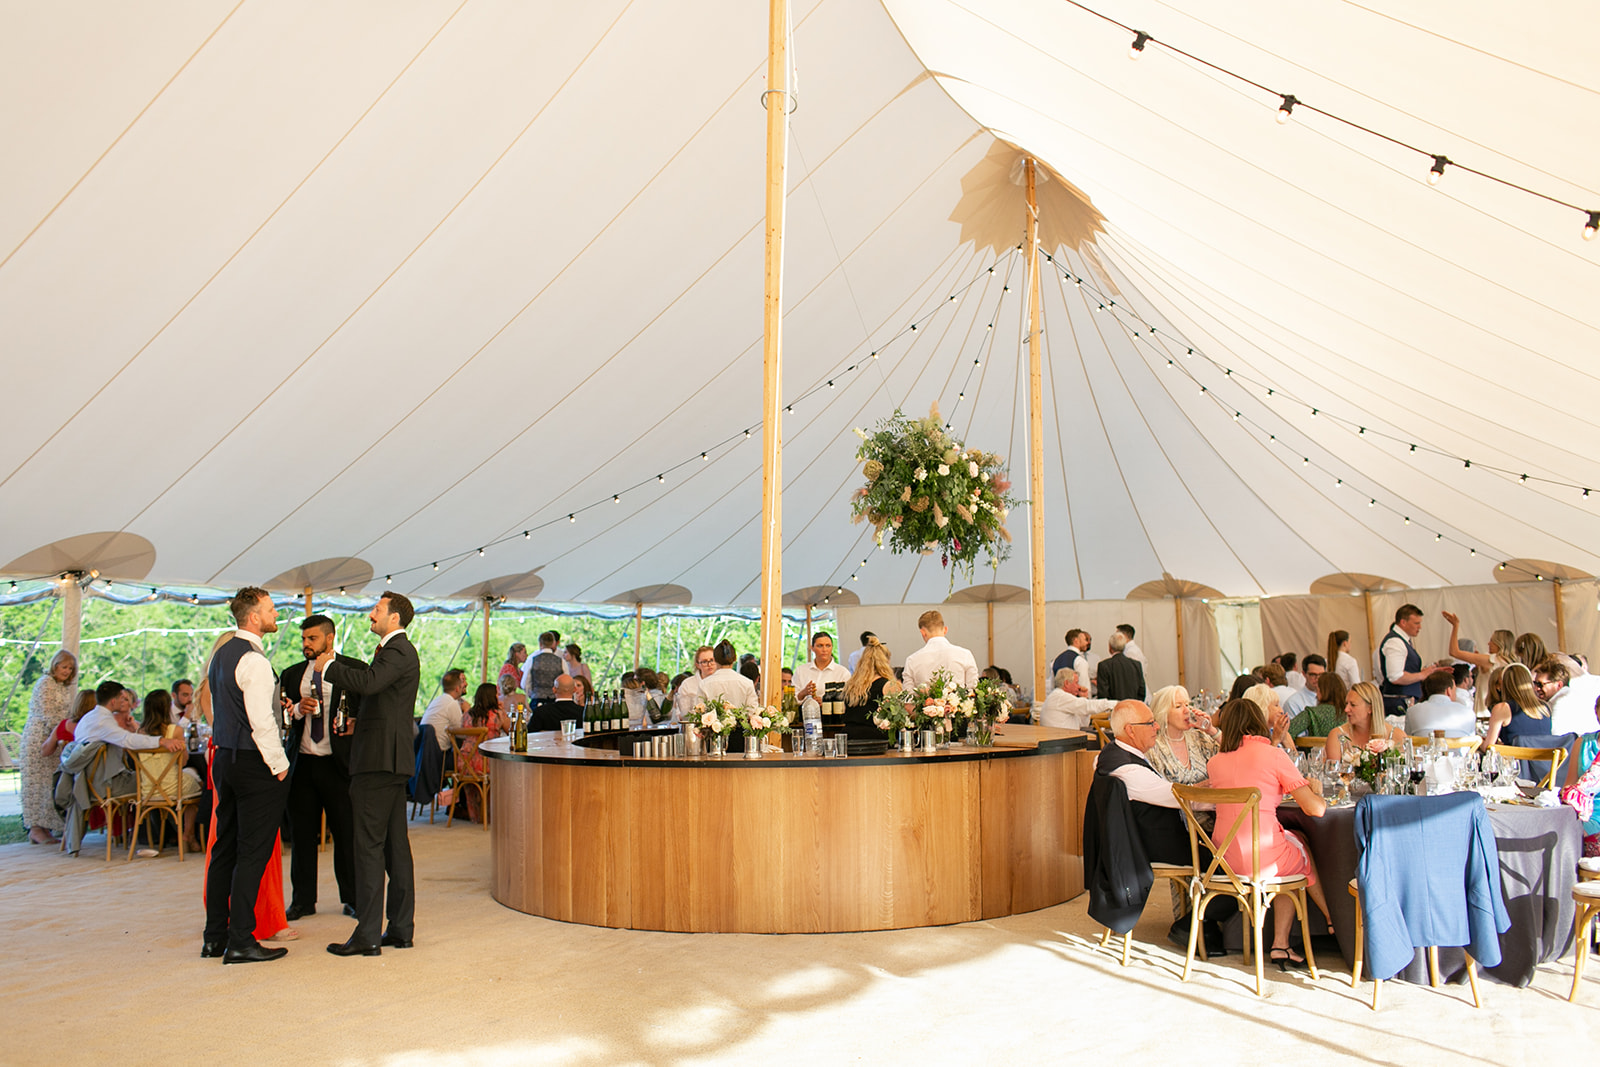 The Sperry Tent interior for Suzie & Charlie's Wedding Reception complete with round bar